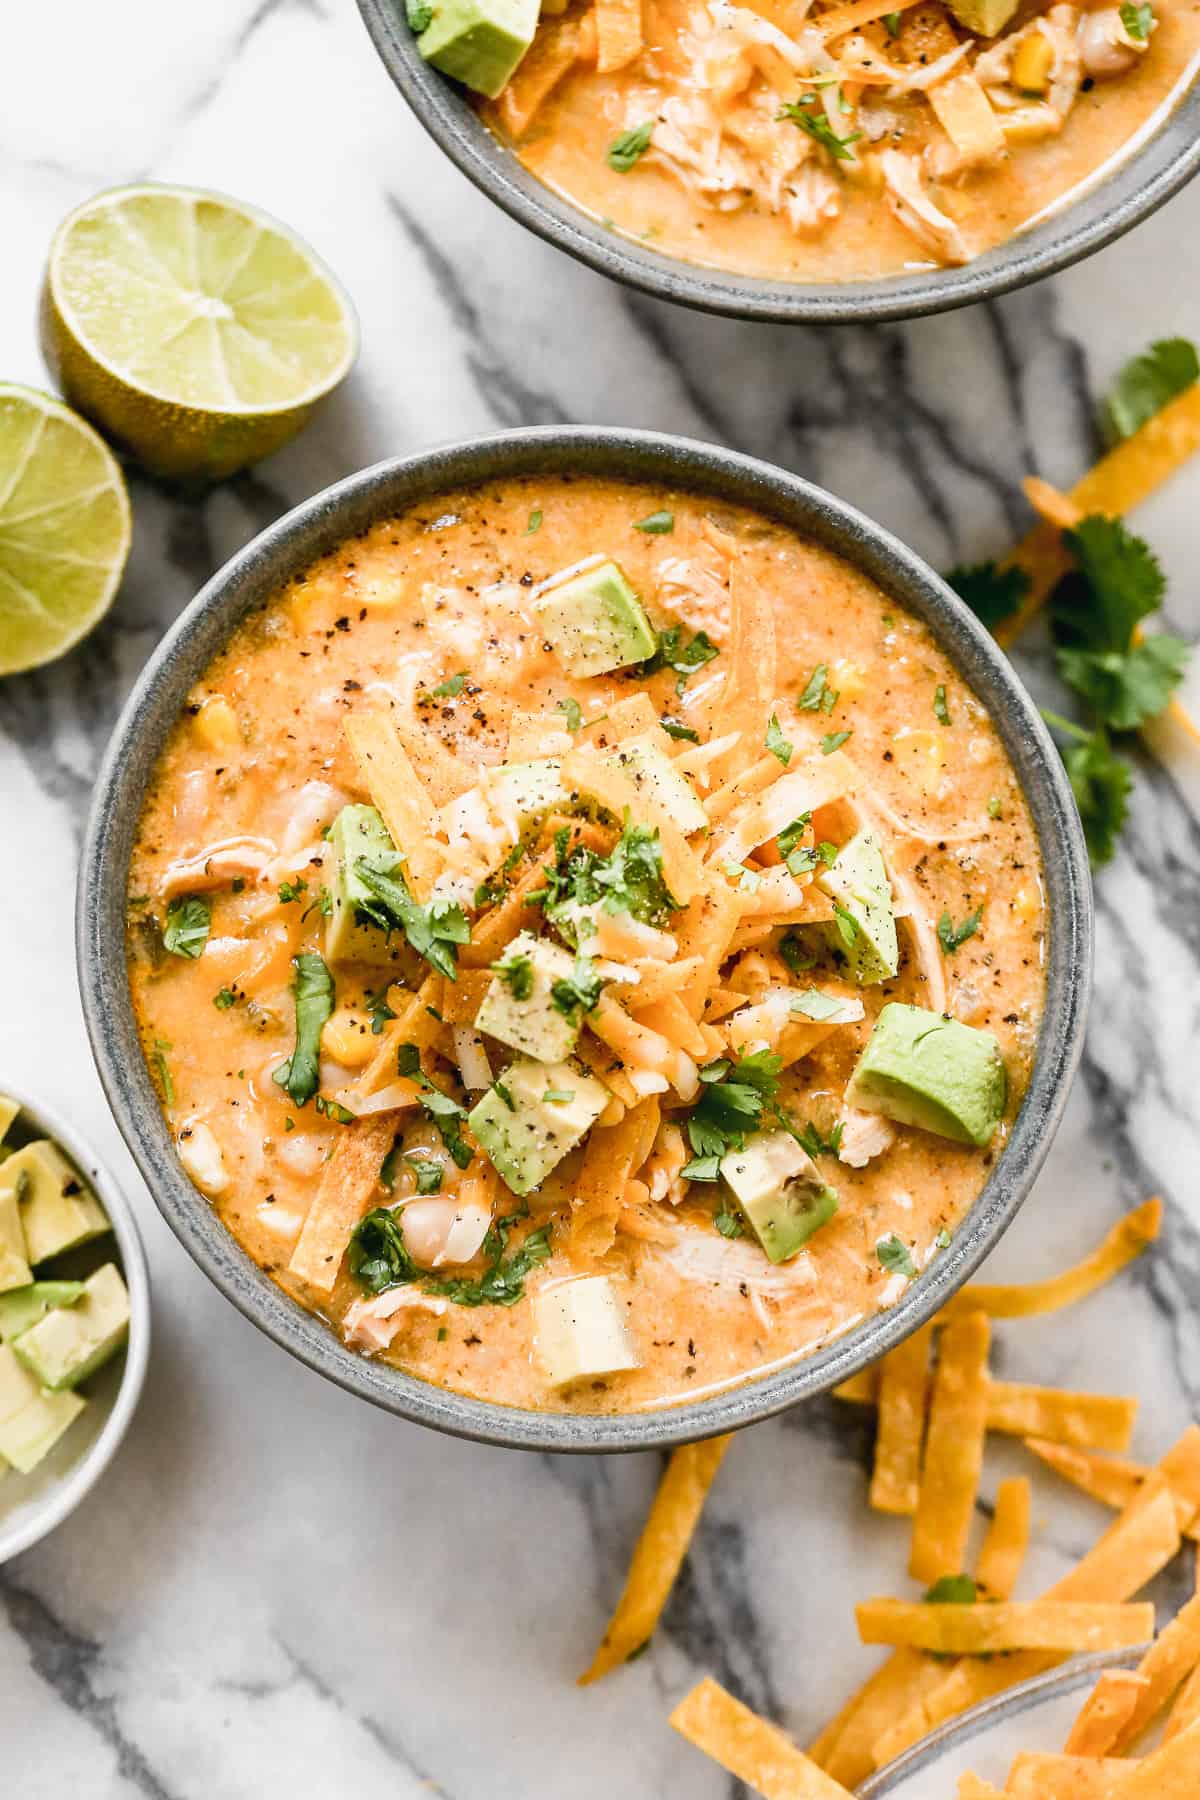 A bowl of creamy White Chicken Chili with toppings, ready to enjoy.